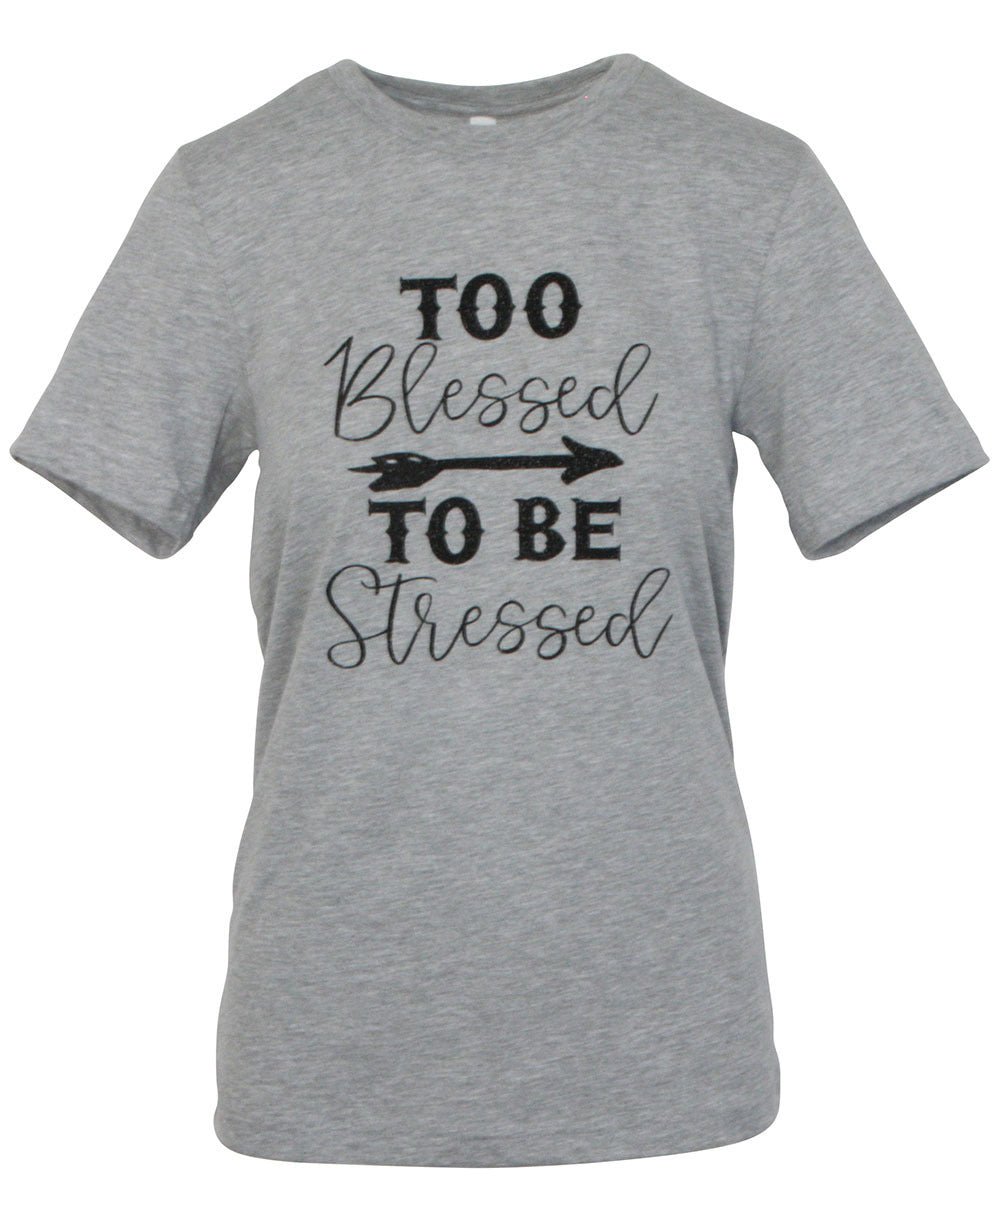 Too Blessed to Be Stressed, Positive T-shirt for Women - Inspirational Apparel L